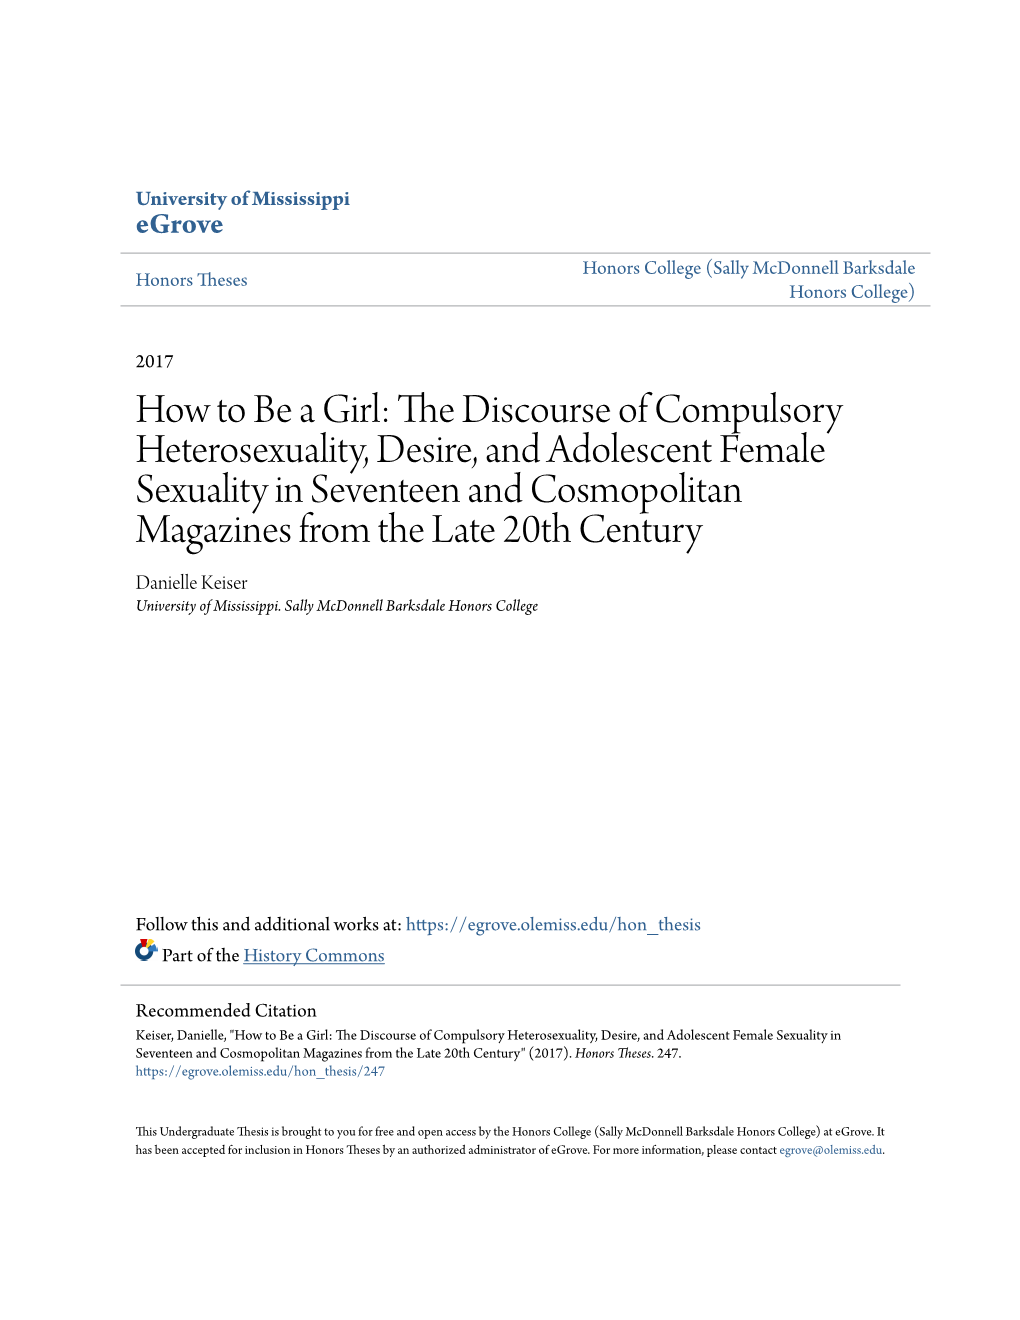 How to Be a Girl: the Discourse of Compulsory Heterosexuality